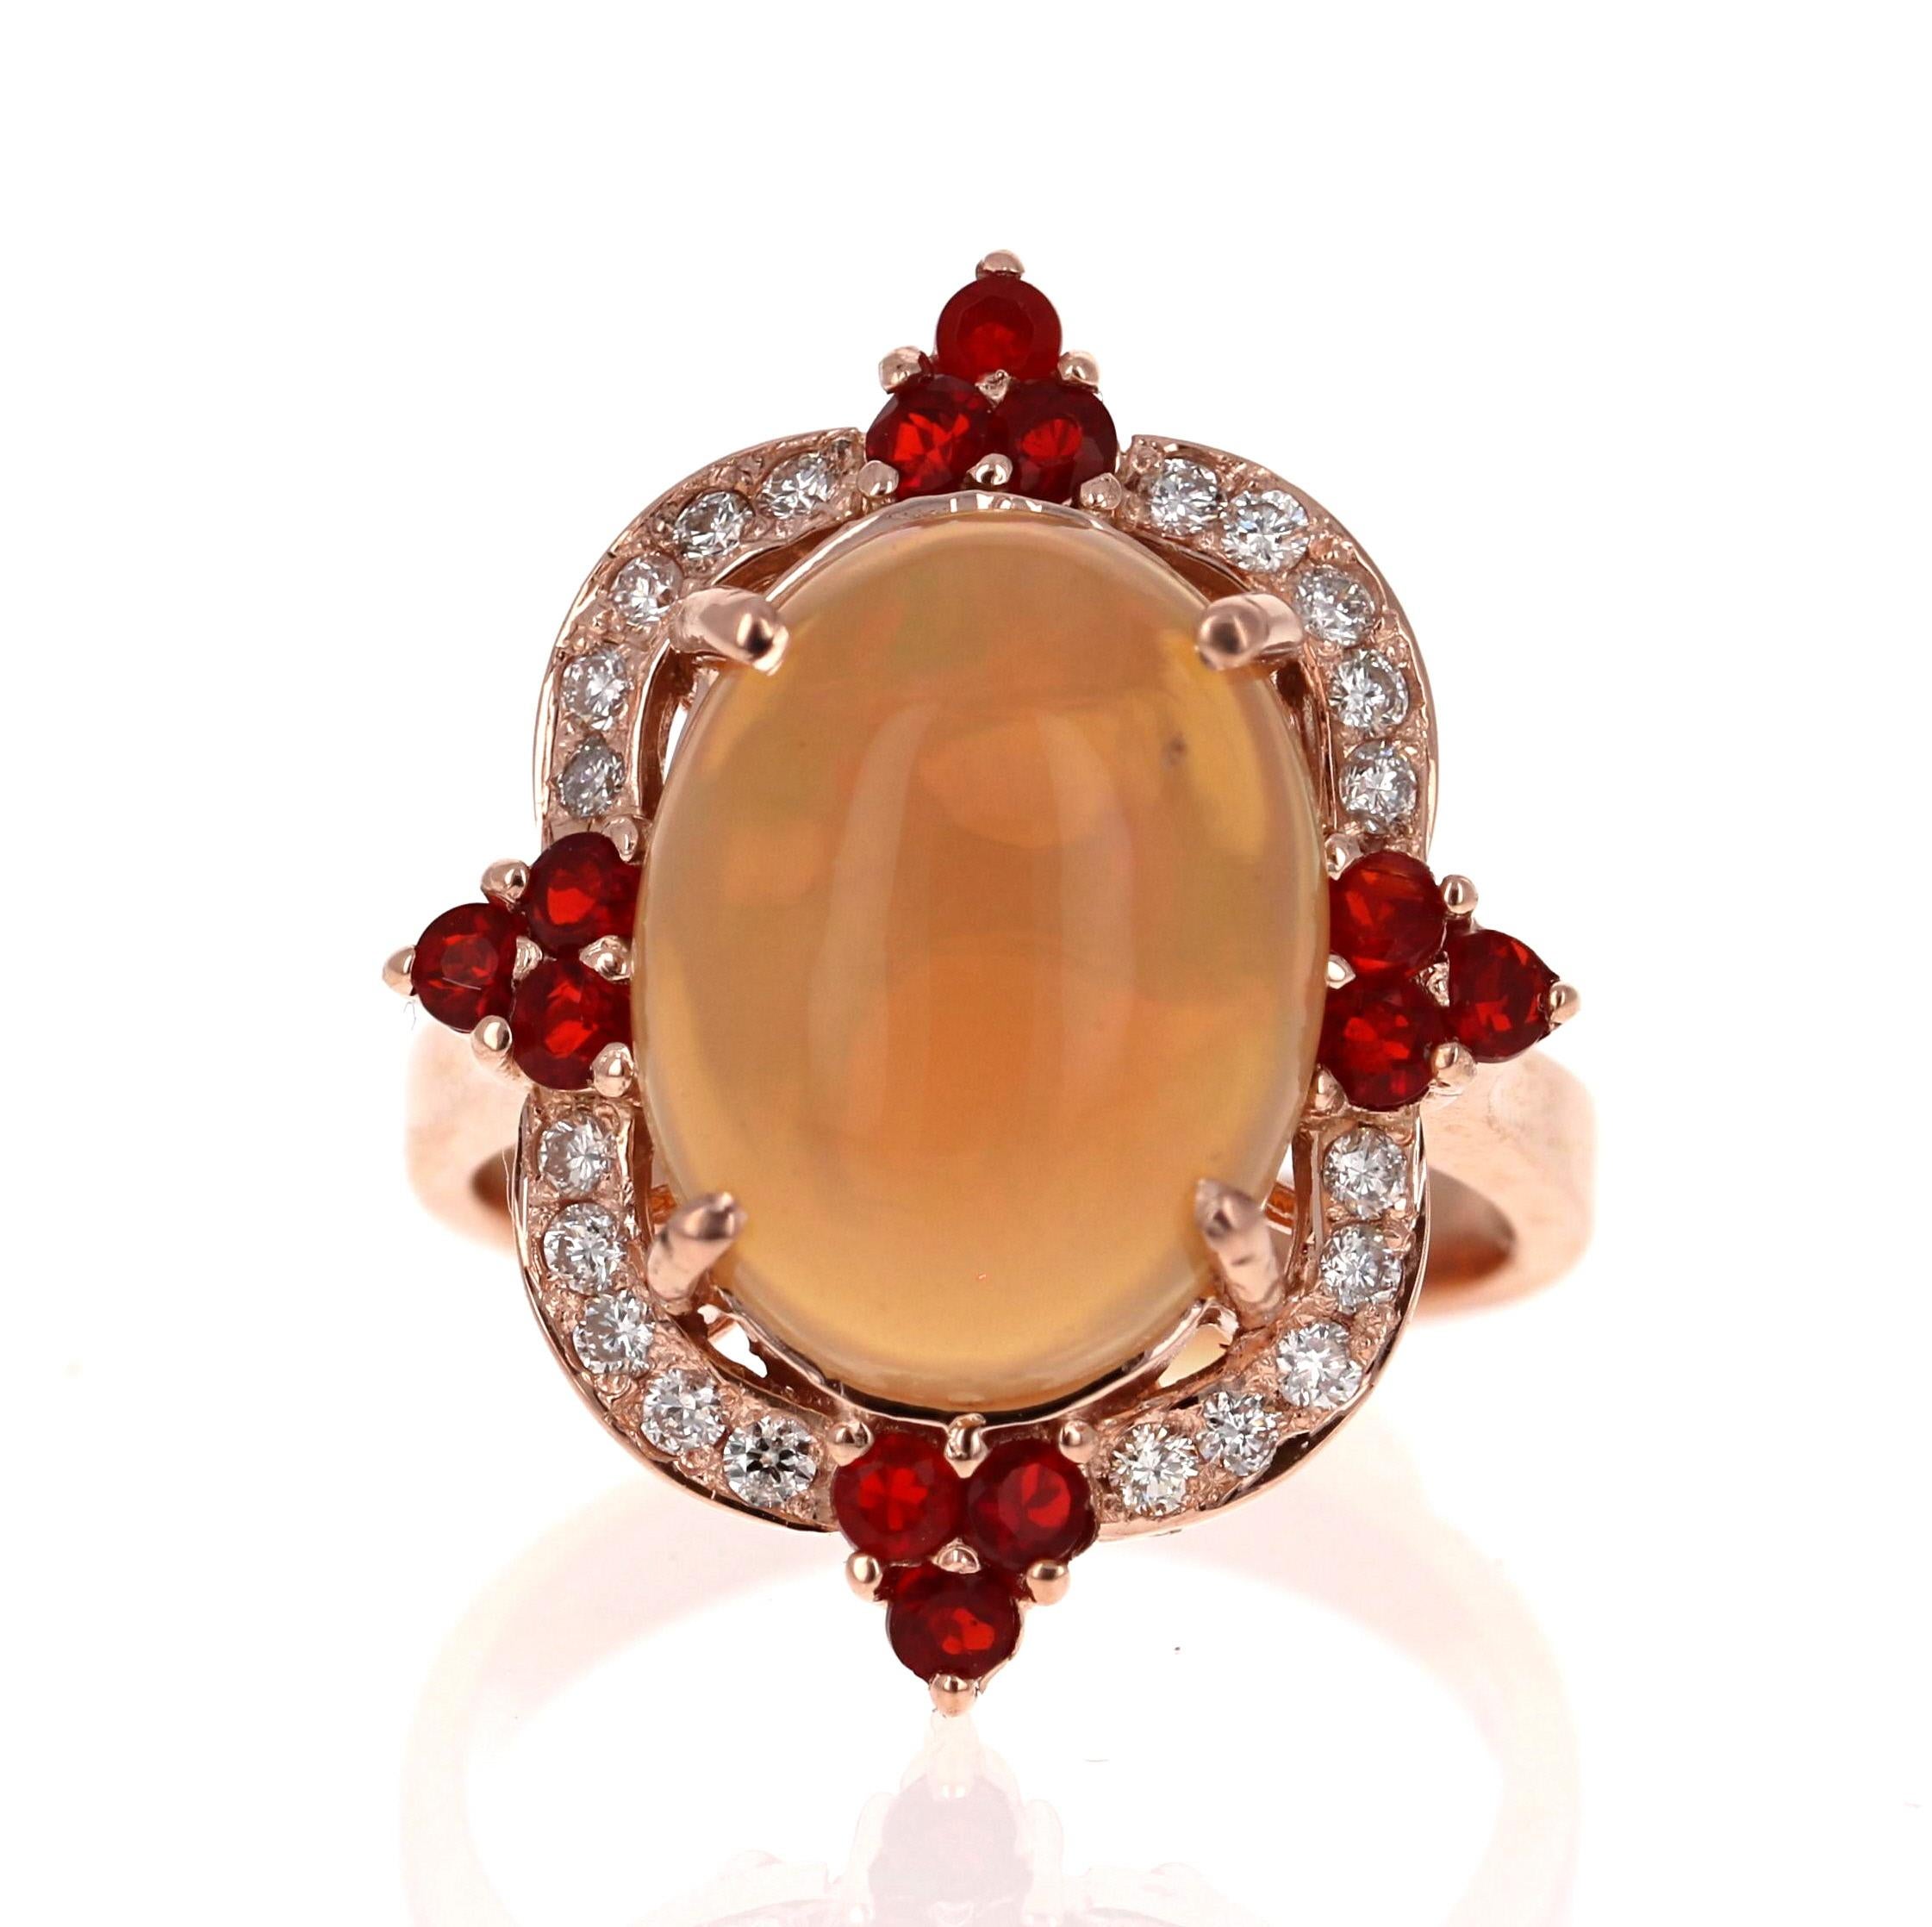 Stunning and uniquely designed 6.63 Carat Oval Cut Opal Diamond Rose Gold Ring with Fire Opal accents!

The Oval Cut Opal in the center of the ring weighs 3.87 carats.  It is surrounded by 20 Round Cut Diamonds that weigh 0.30 carats (Clarity: SI2,